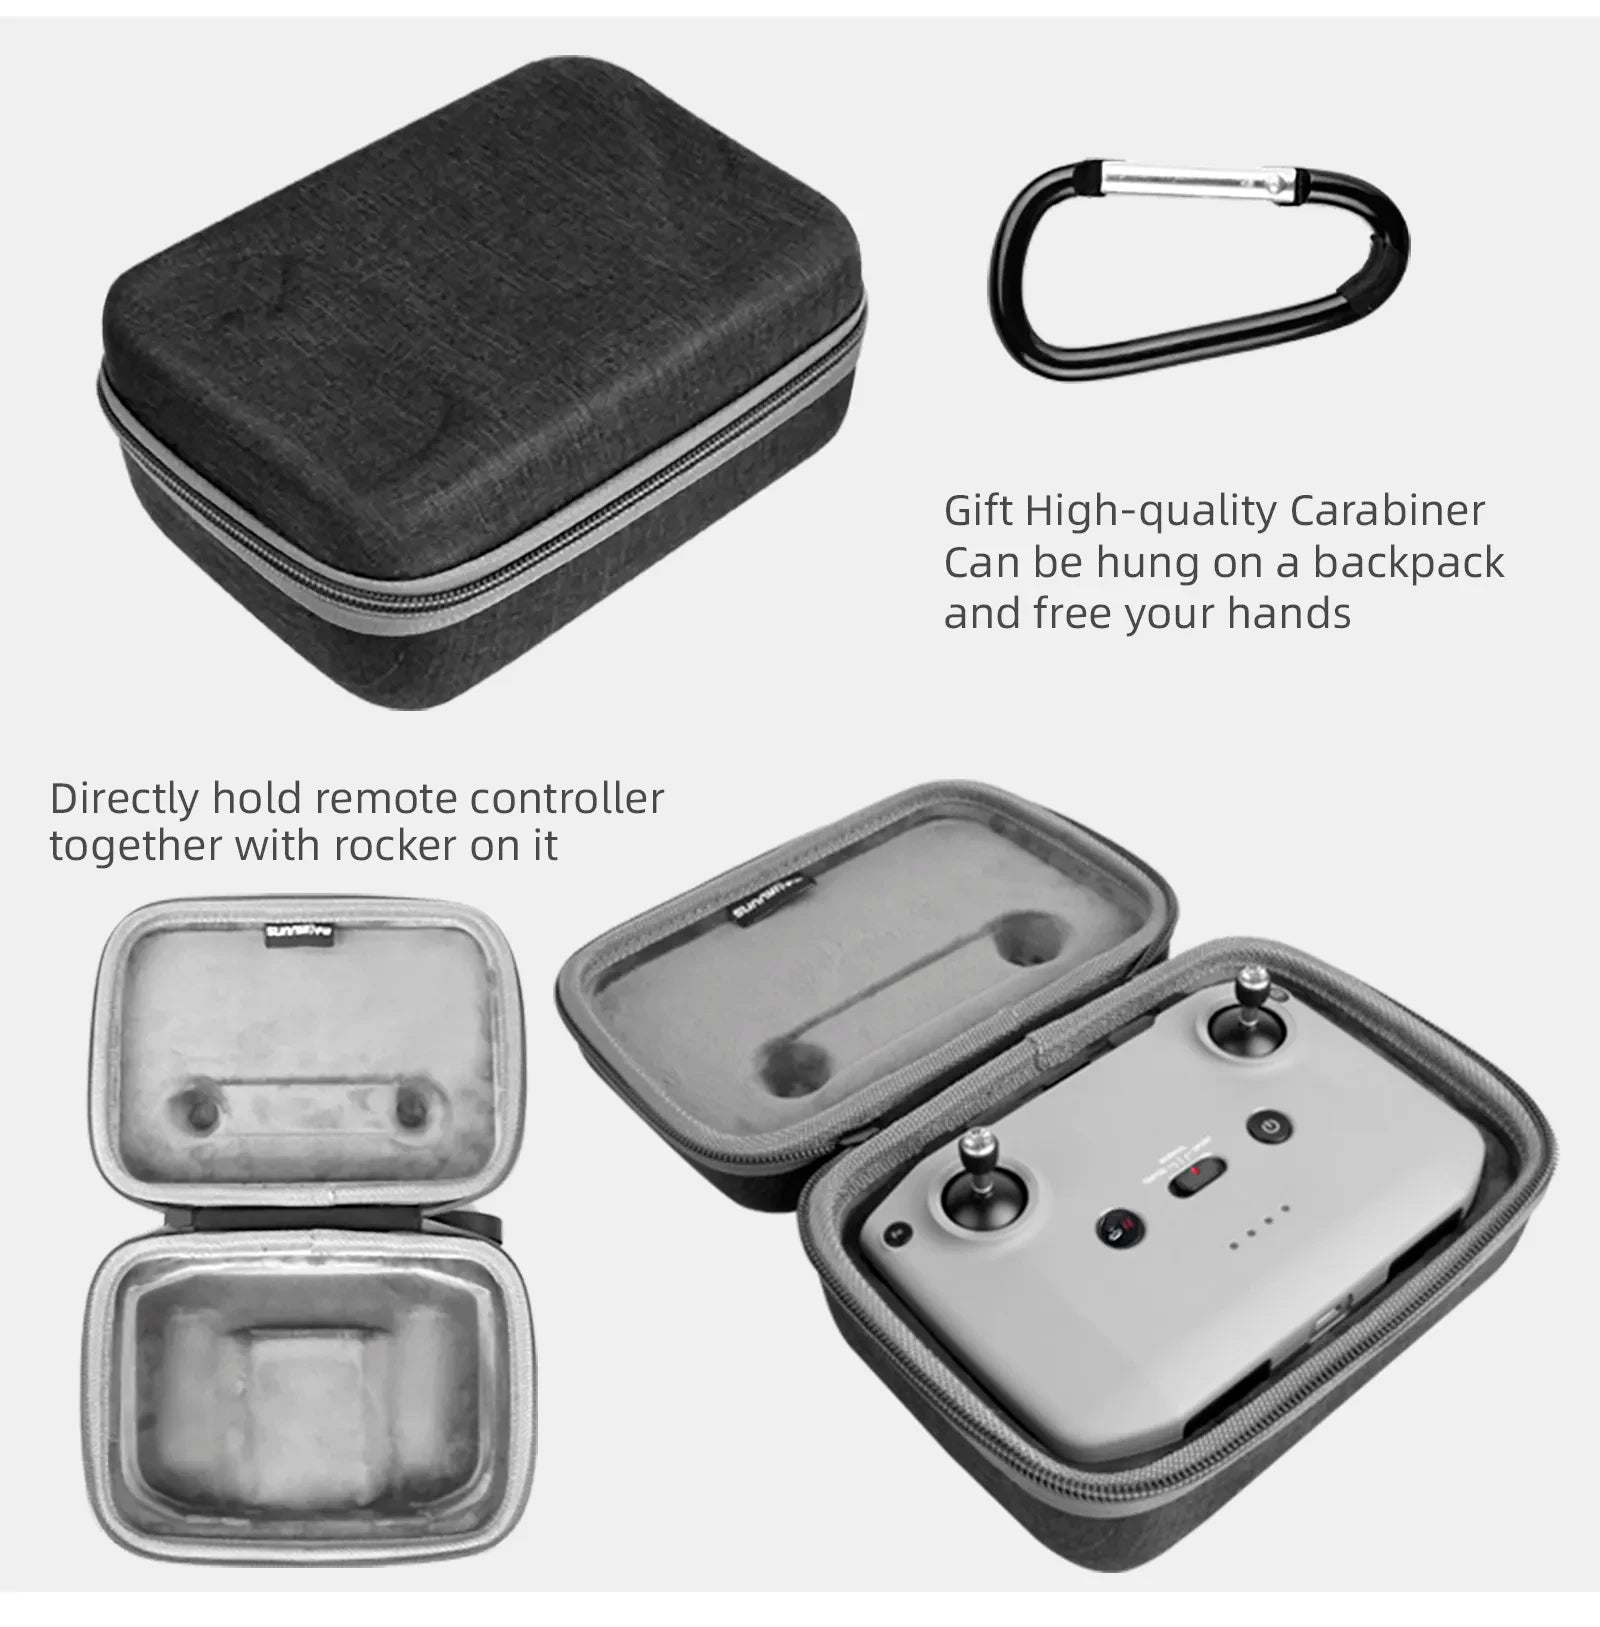 Portable Carrying Case For DJI Mini 4 Pro, Carabiner can be hung on a backpack and free your hands